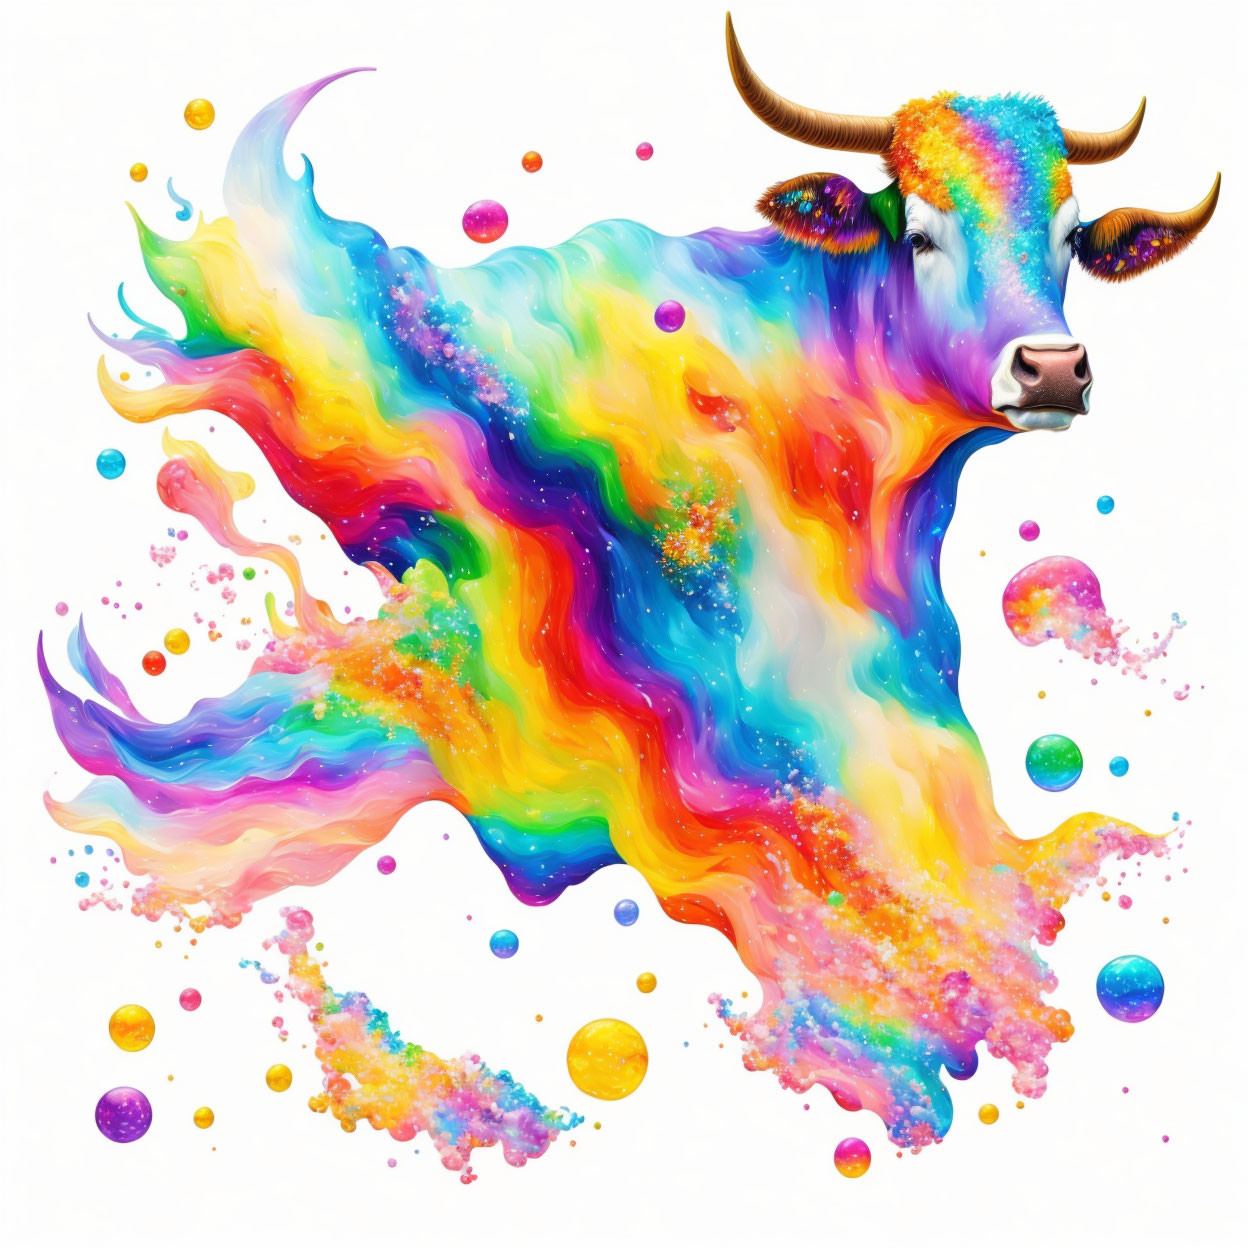 Colorful Bull Illustration with Rainbow Paint-Like Body on White Background